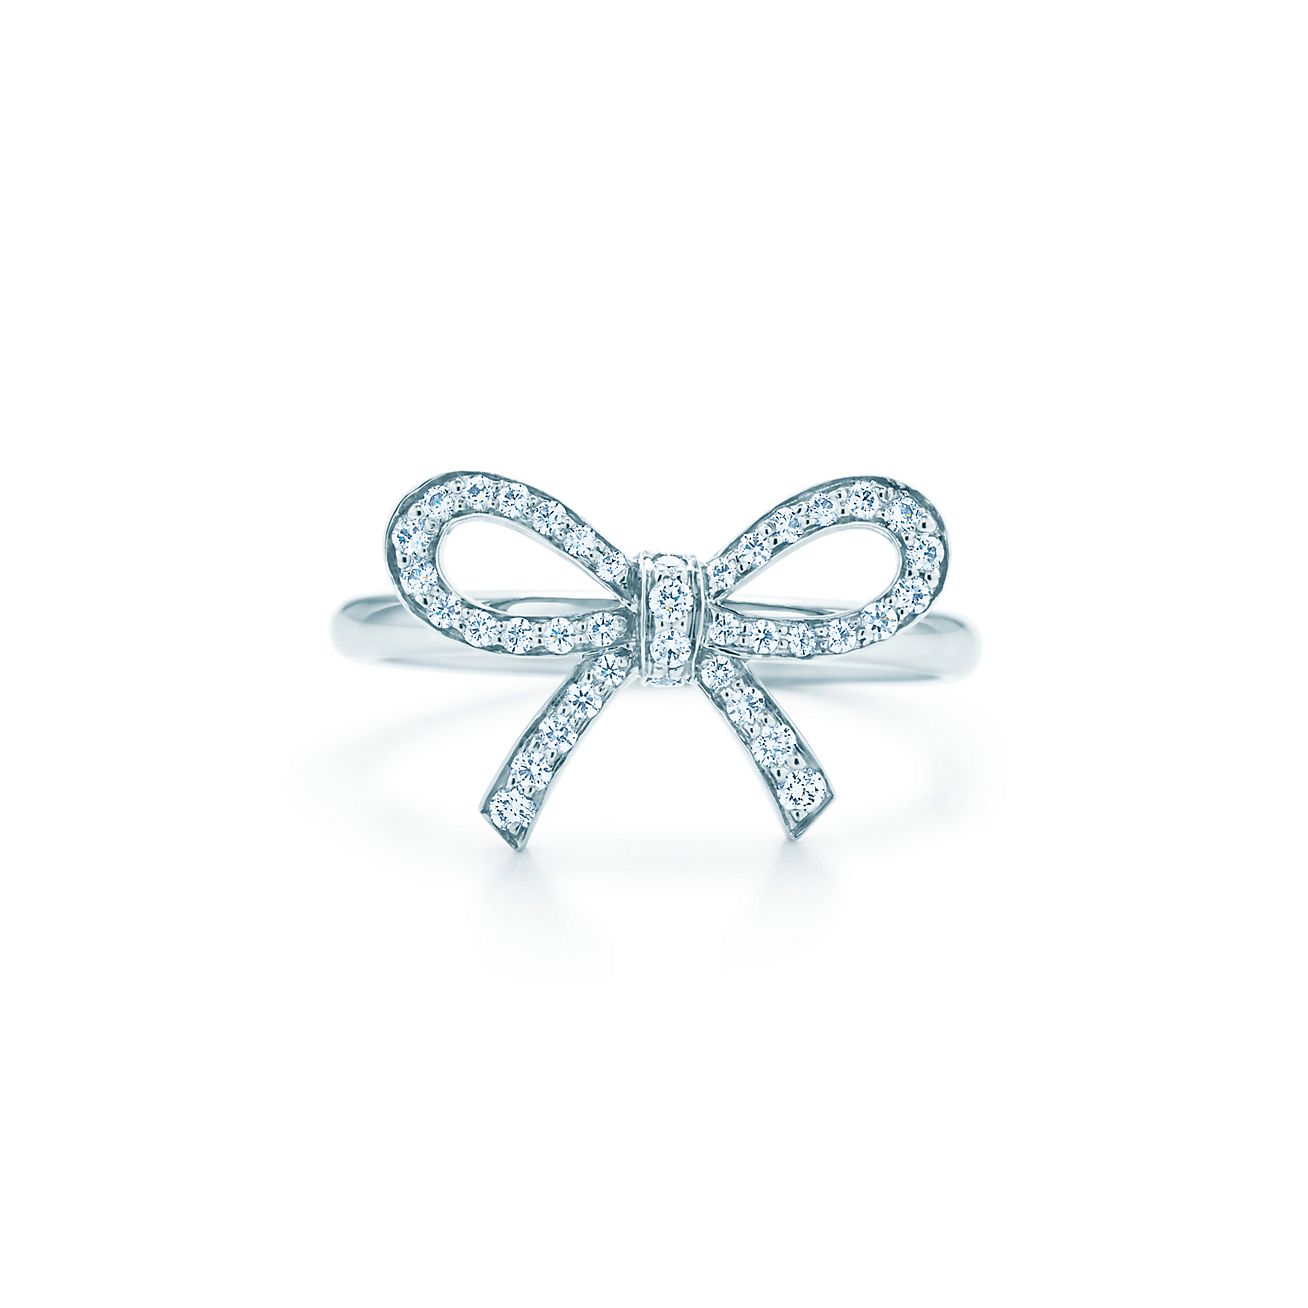 Tiffany Bow ring in platinum with 